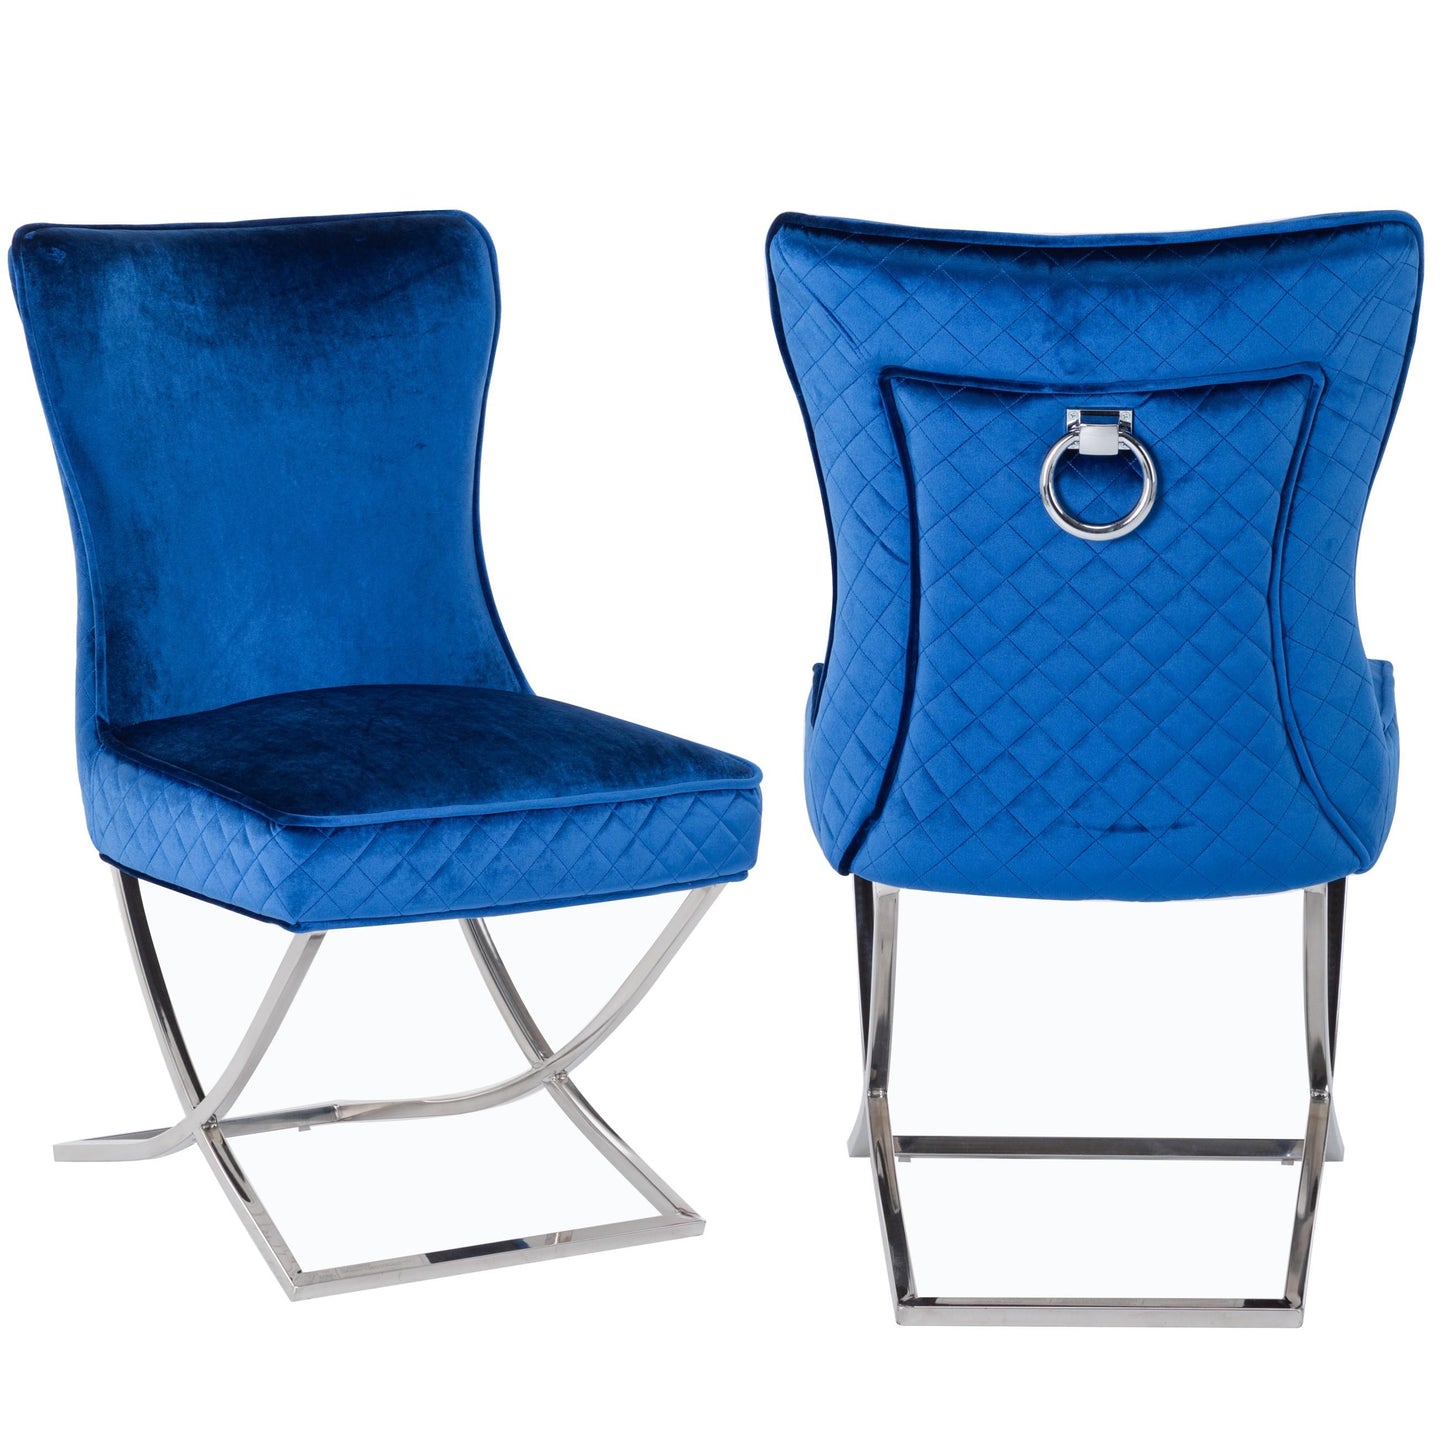 (JANET BLUE- 2 PACK) - VELVET FABRIC - DINING CHAIRS